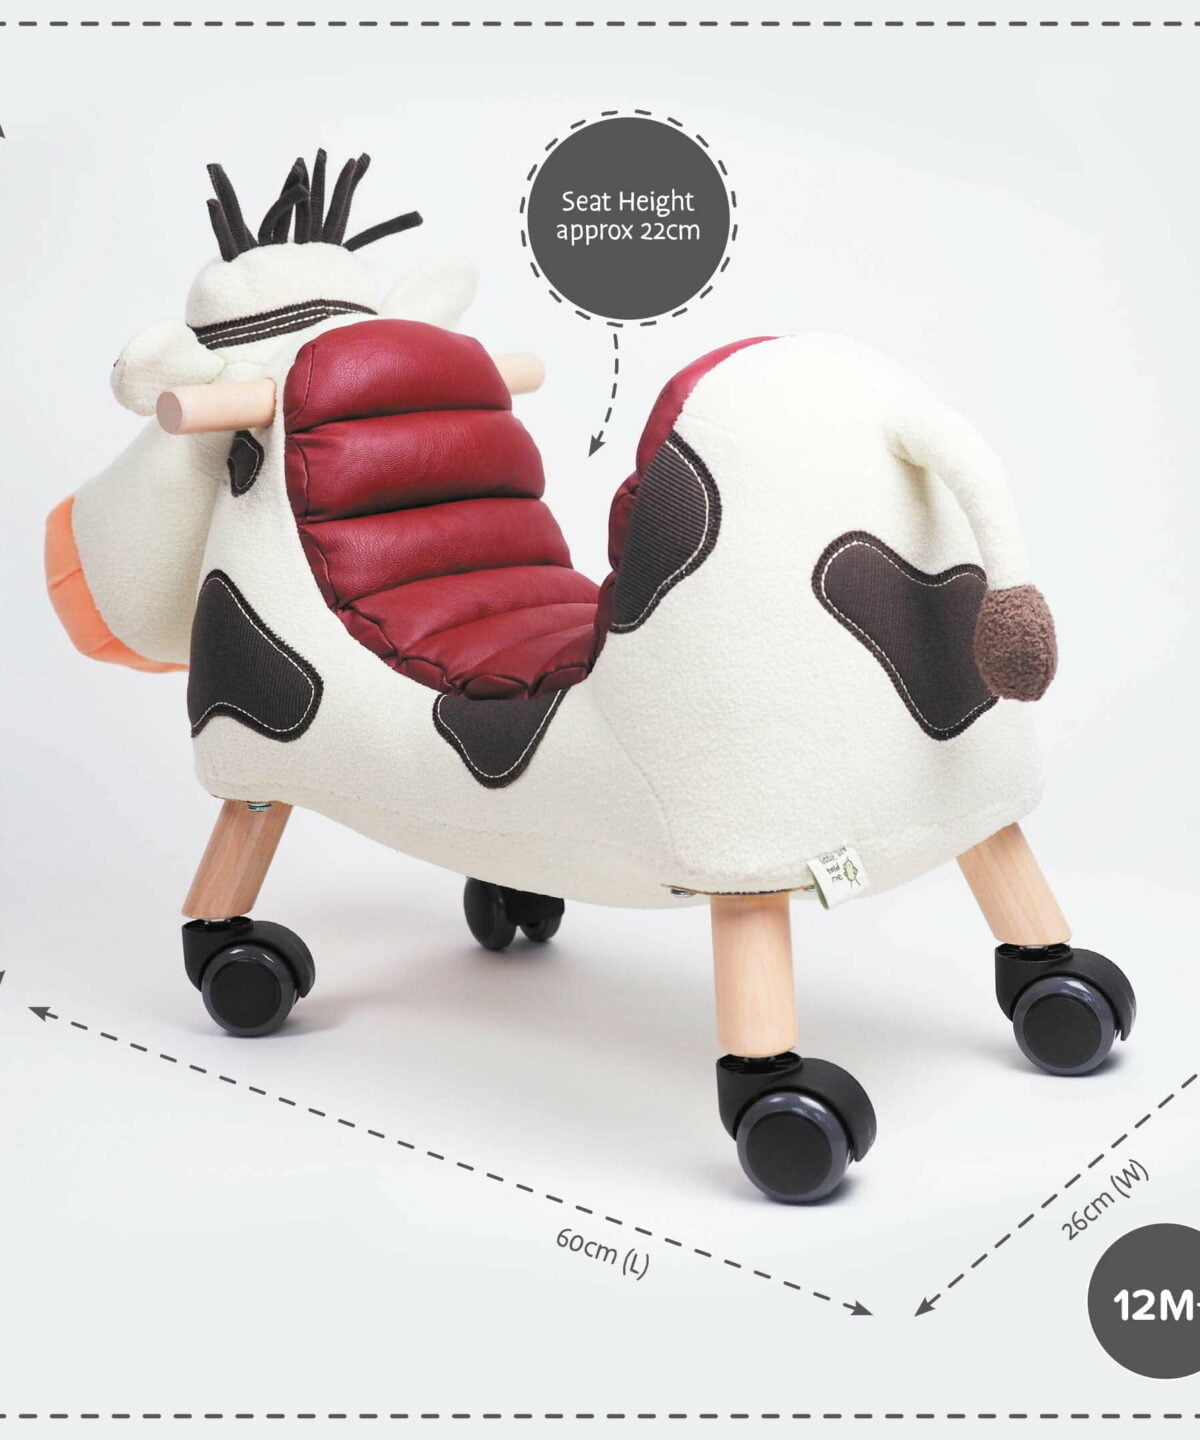 Product dimensions displayed for Moobert Cow Ride On Toy